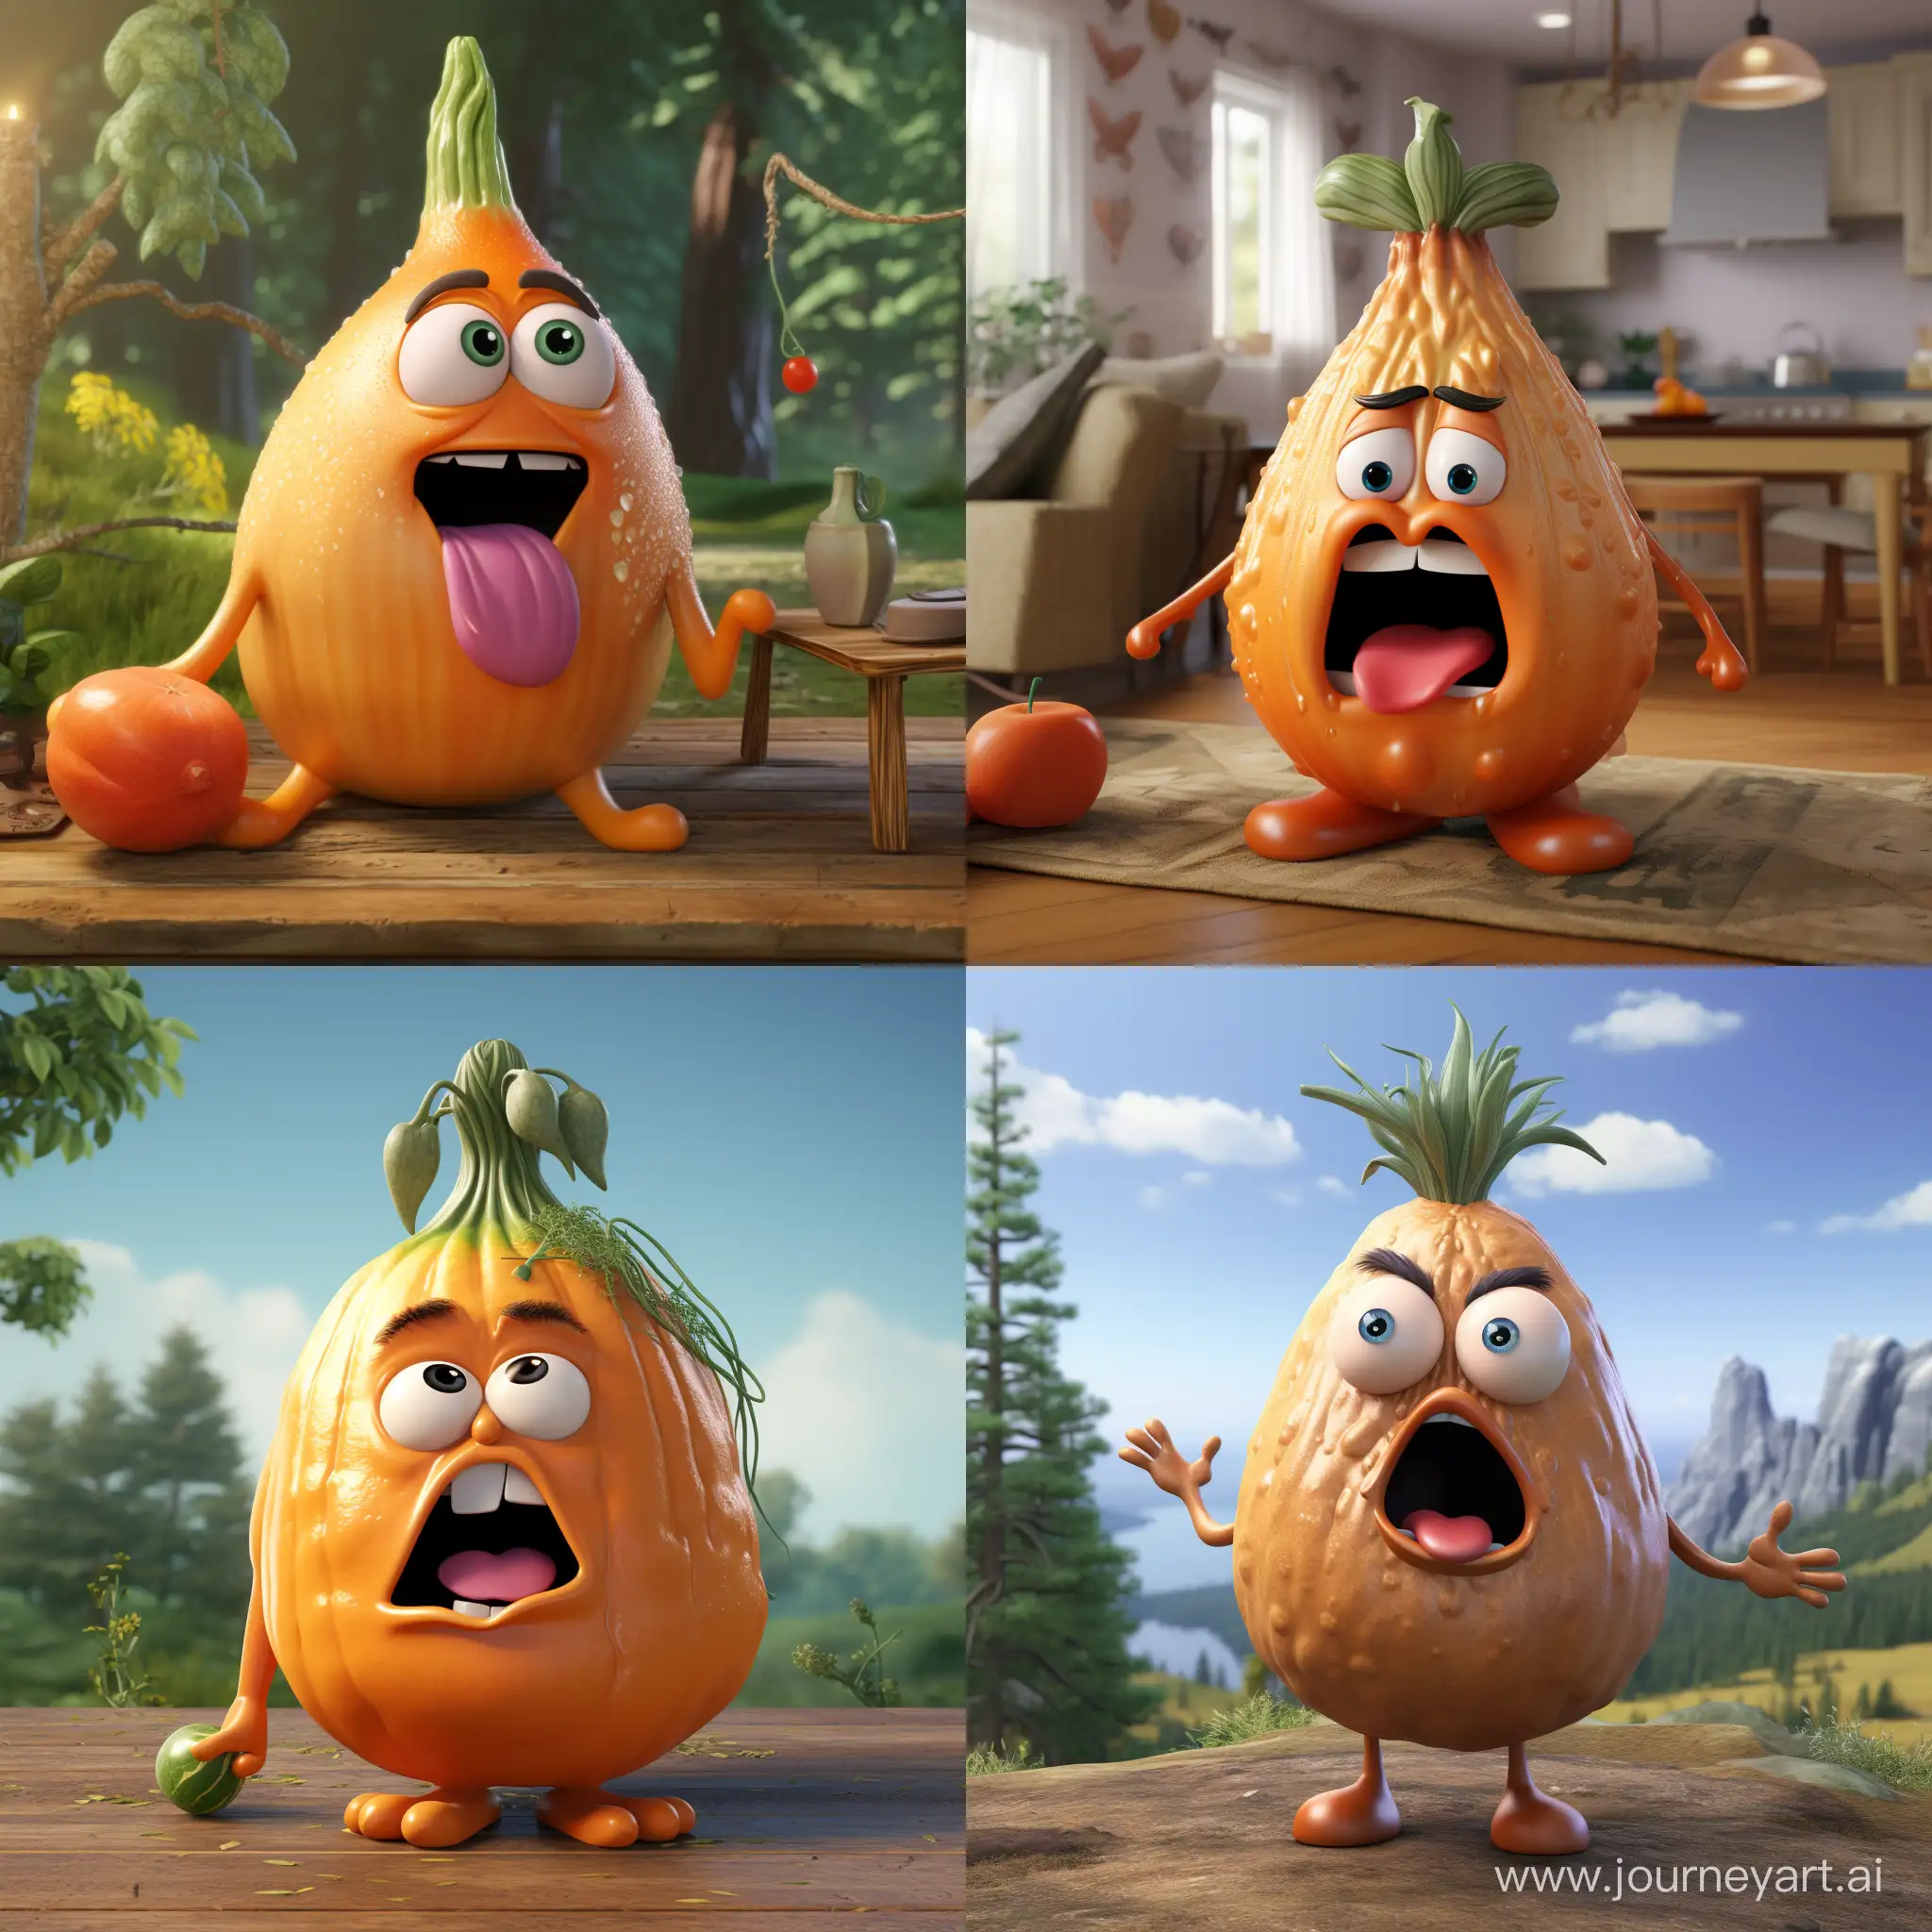 Animated-3D-Onion-with-Expressive-Tears